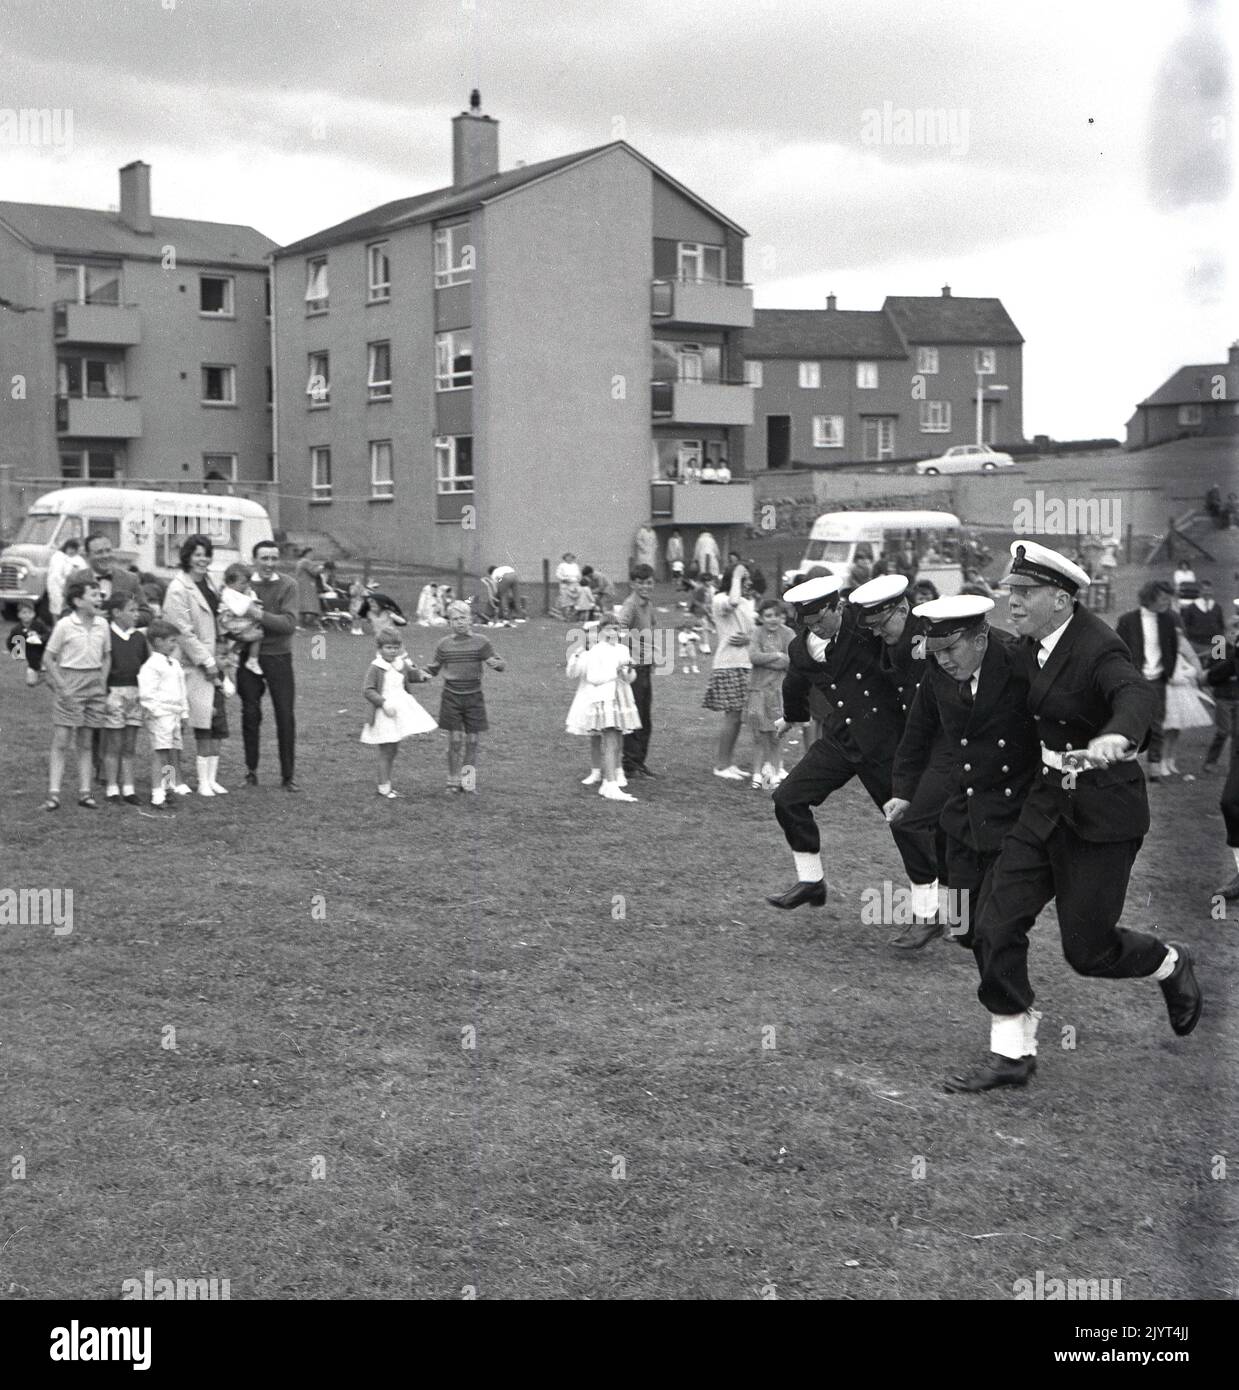 1965, historical, uniformed naval officers taking part in a three-legged race in a field at a housing estate in North Queensferry, Edinburgh, Scotland, UK, as part of the North Queensferry gala day, a community day for the residents of the estate, Stock Photo